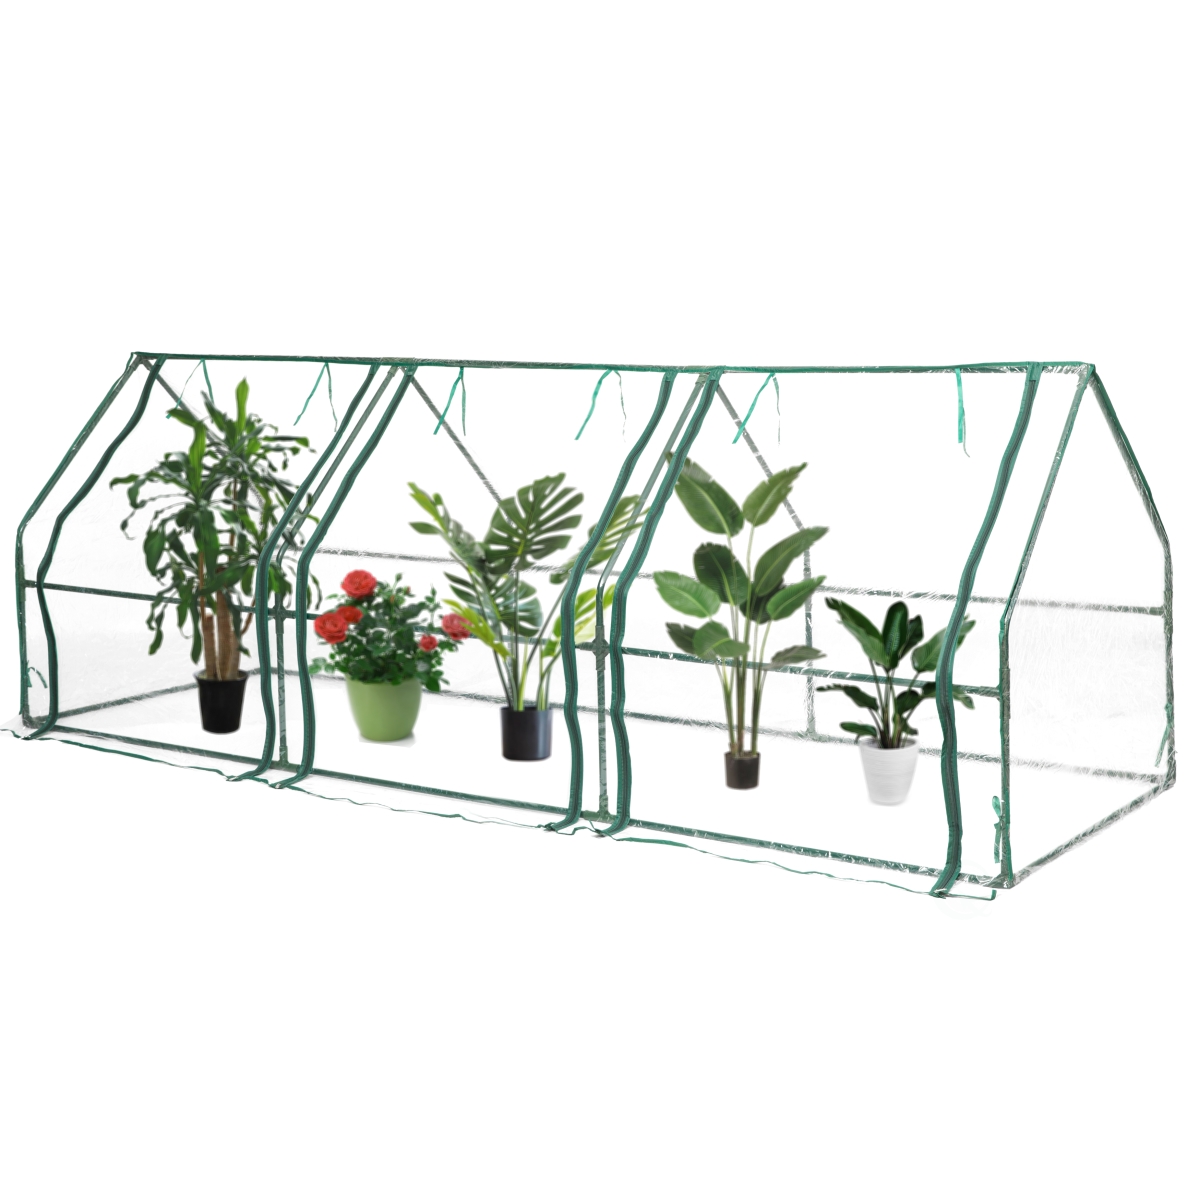 Picture of Gardenised QI004029.L 36.25 x 36.25 x 107 in. Outdoor Waterproof Portable Plant Greenhouse with 2 Clear Zippered Windows, Green - Large